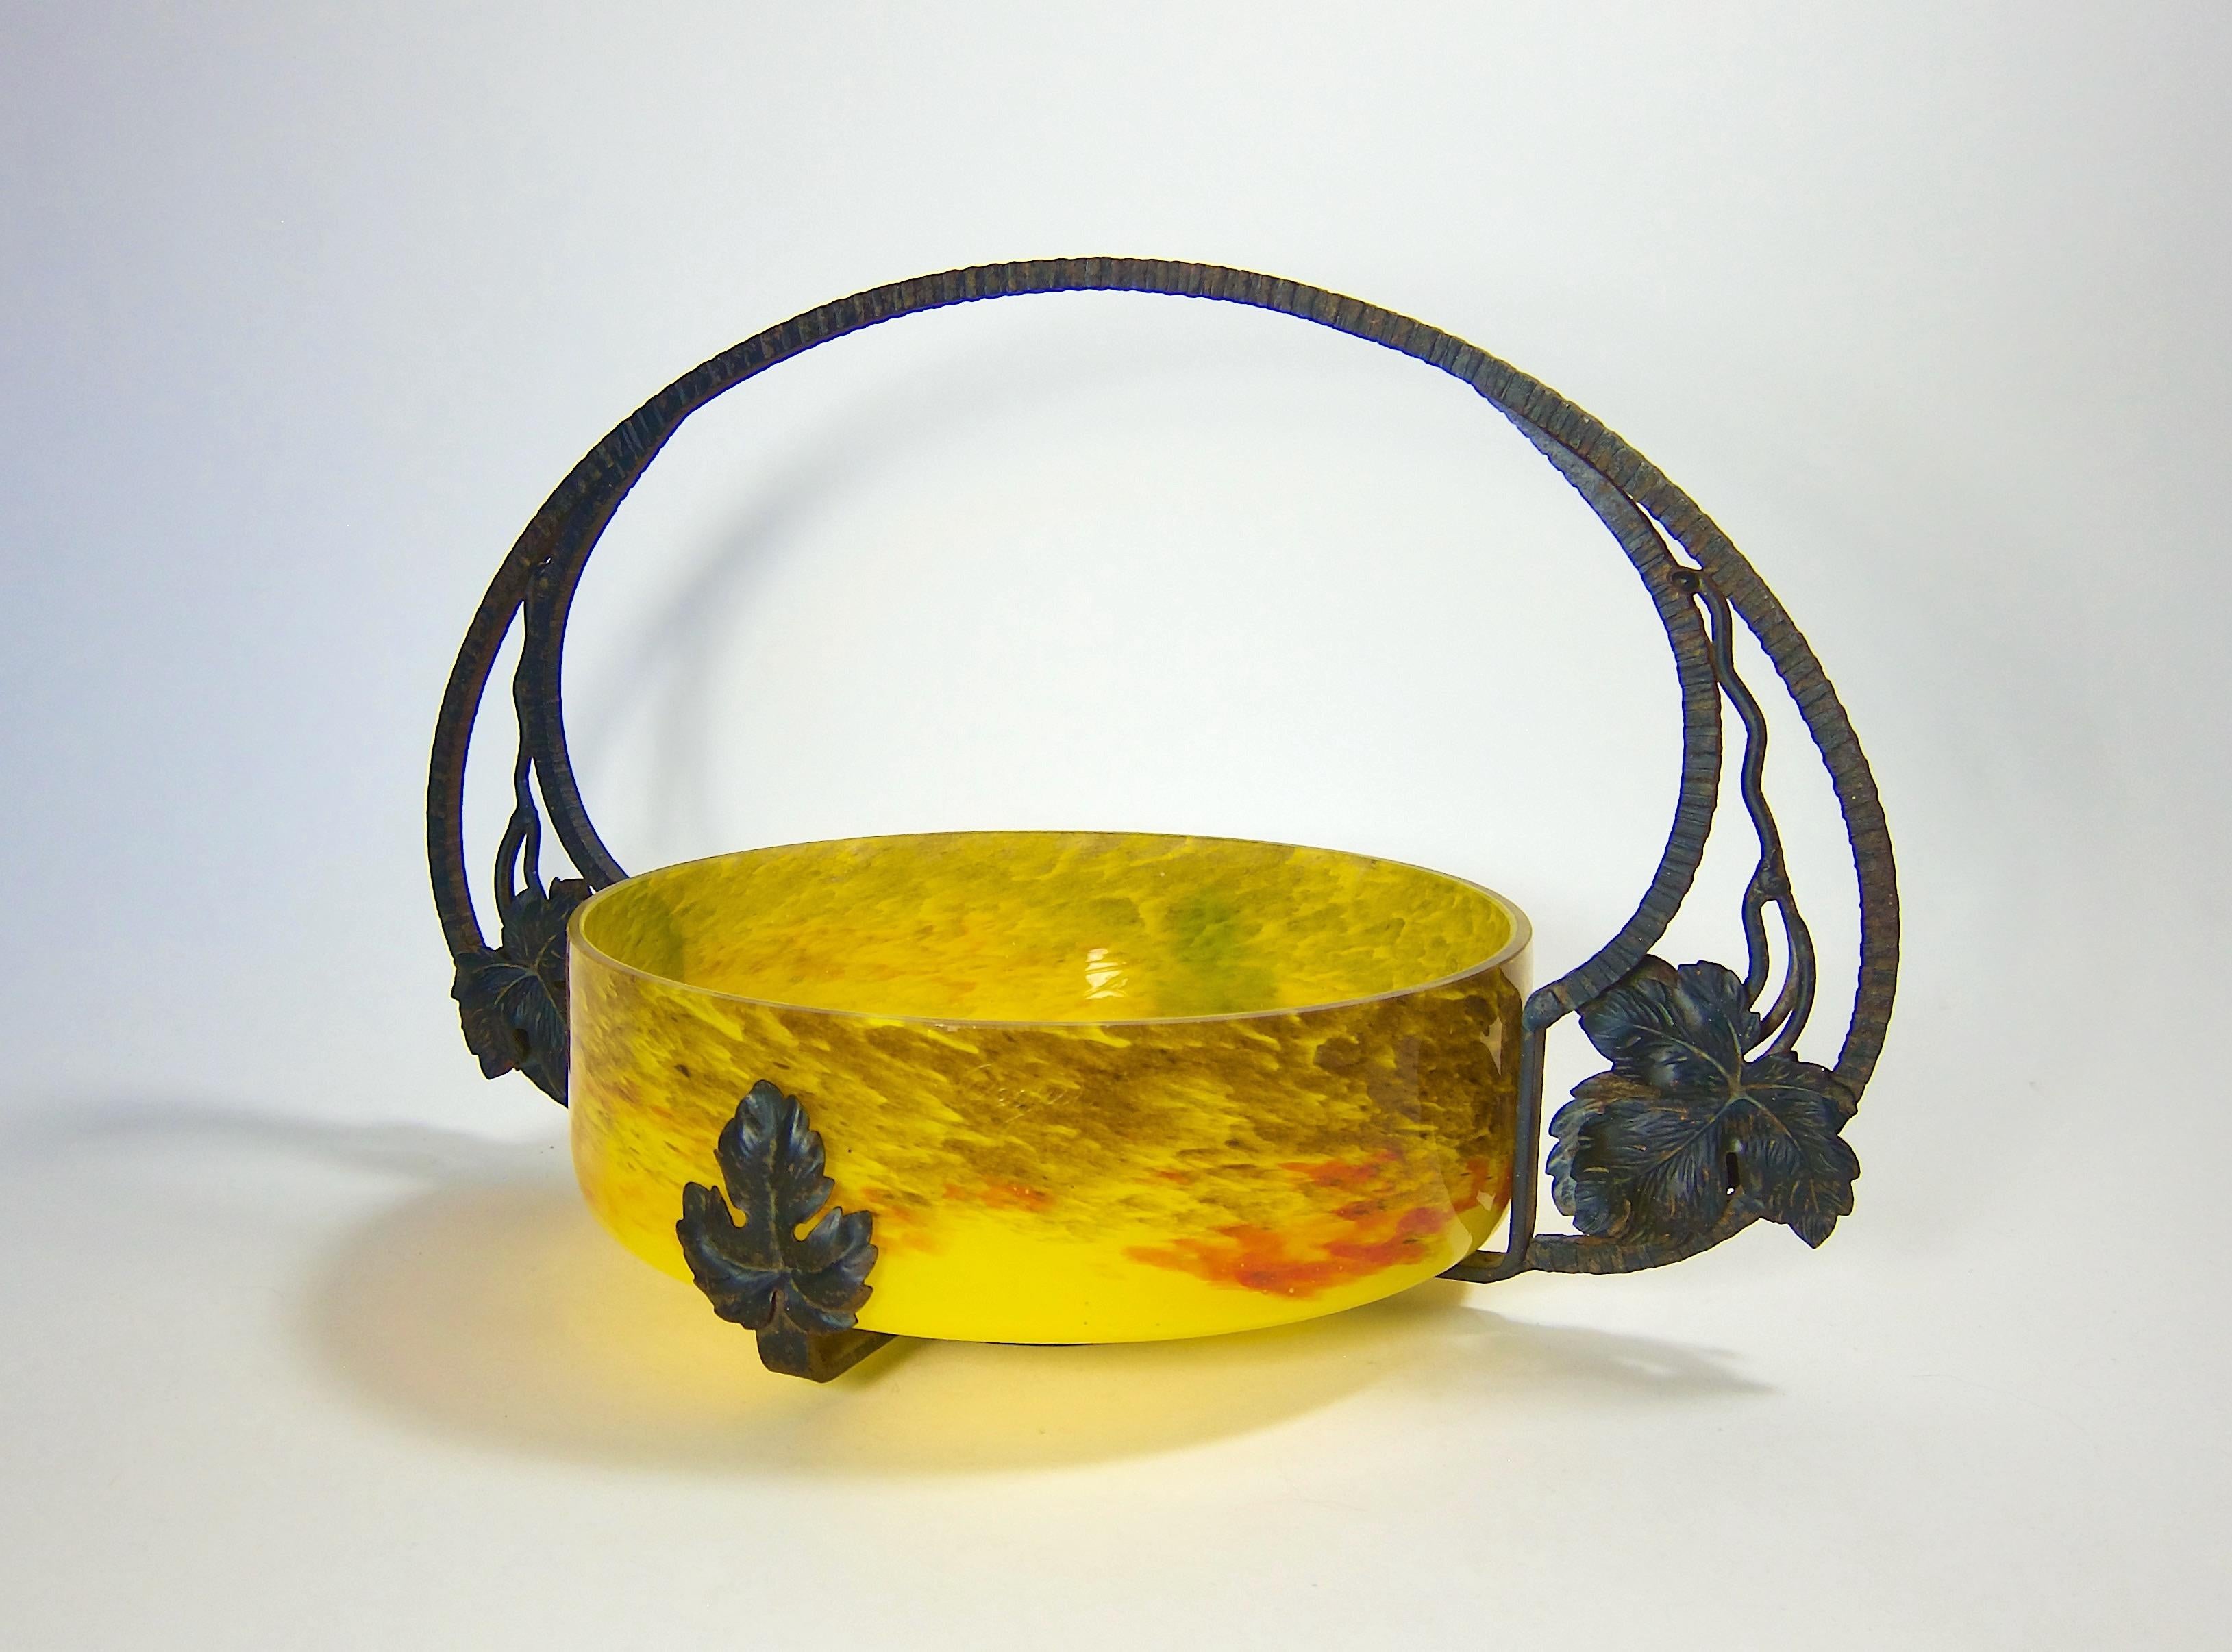 20th Century French Art Deco Verrerie D'Art Degue Centerpiece Bowl in Art Glass and Iron